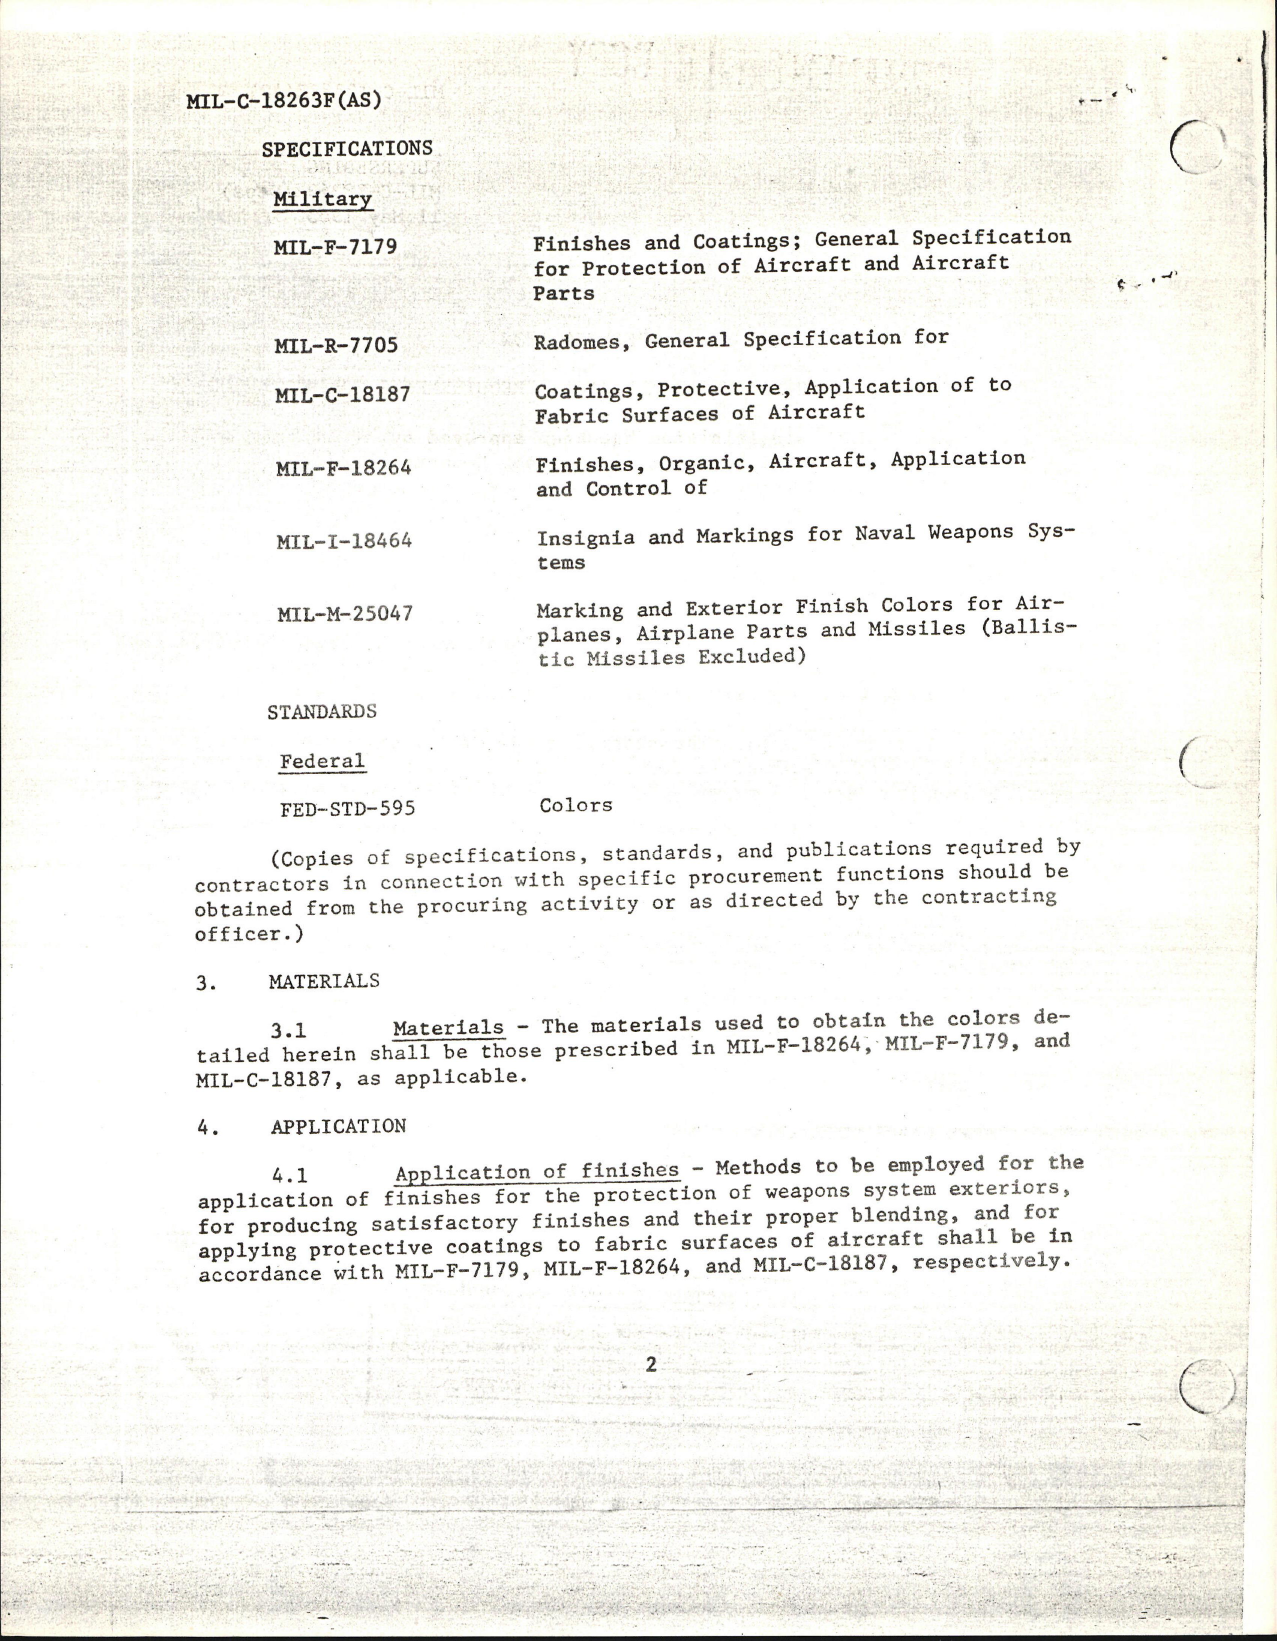 Sample page 6 from AirCorps Library document: Military Specification Requirements for Exterior Colors of Naval Aircraft